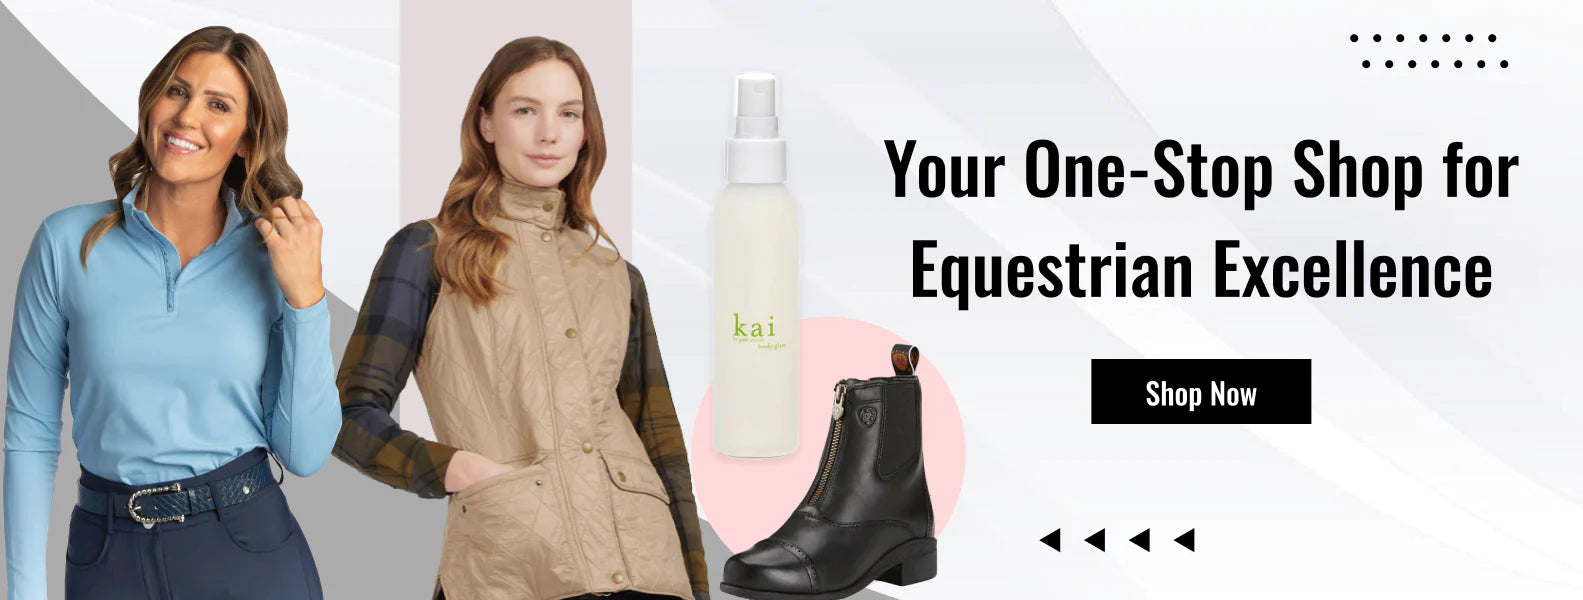 Equestrian Riding Apparel & Clothing by Gee Gee Equine 